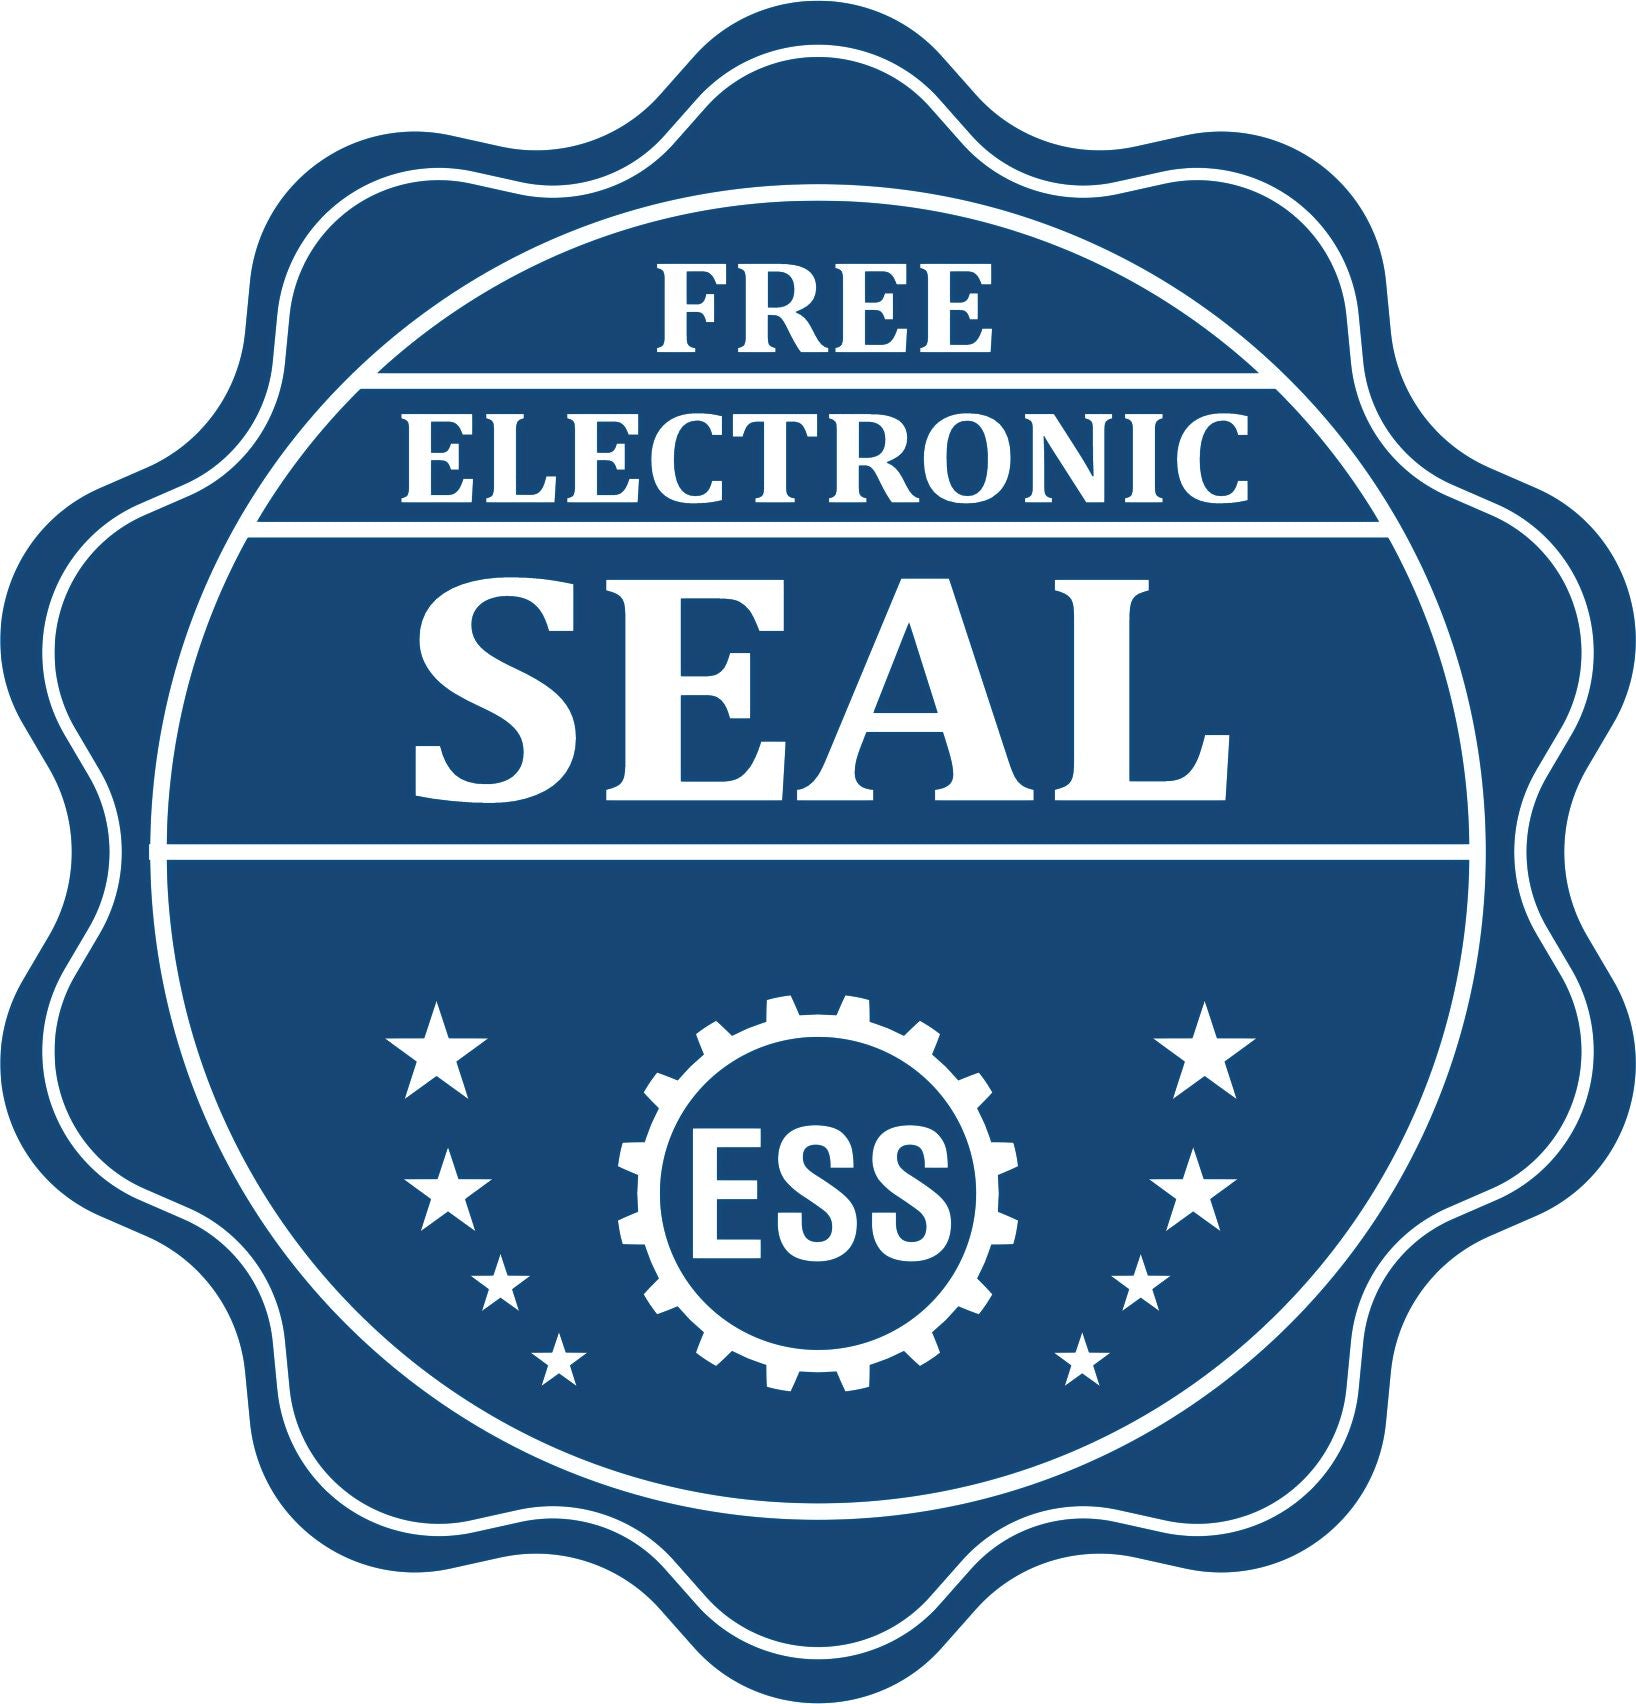 A badge showing a free electronic seal for the Mississippi Desk Architect Embossing Seal with stars and the ESS gear on the emblem.